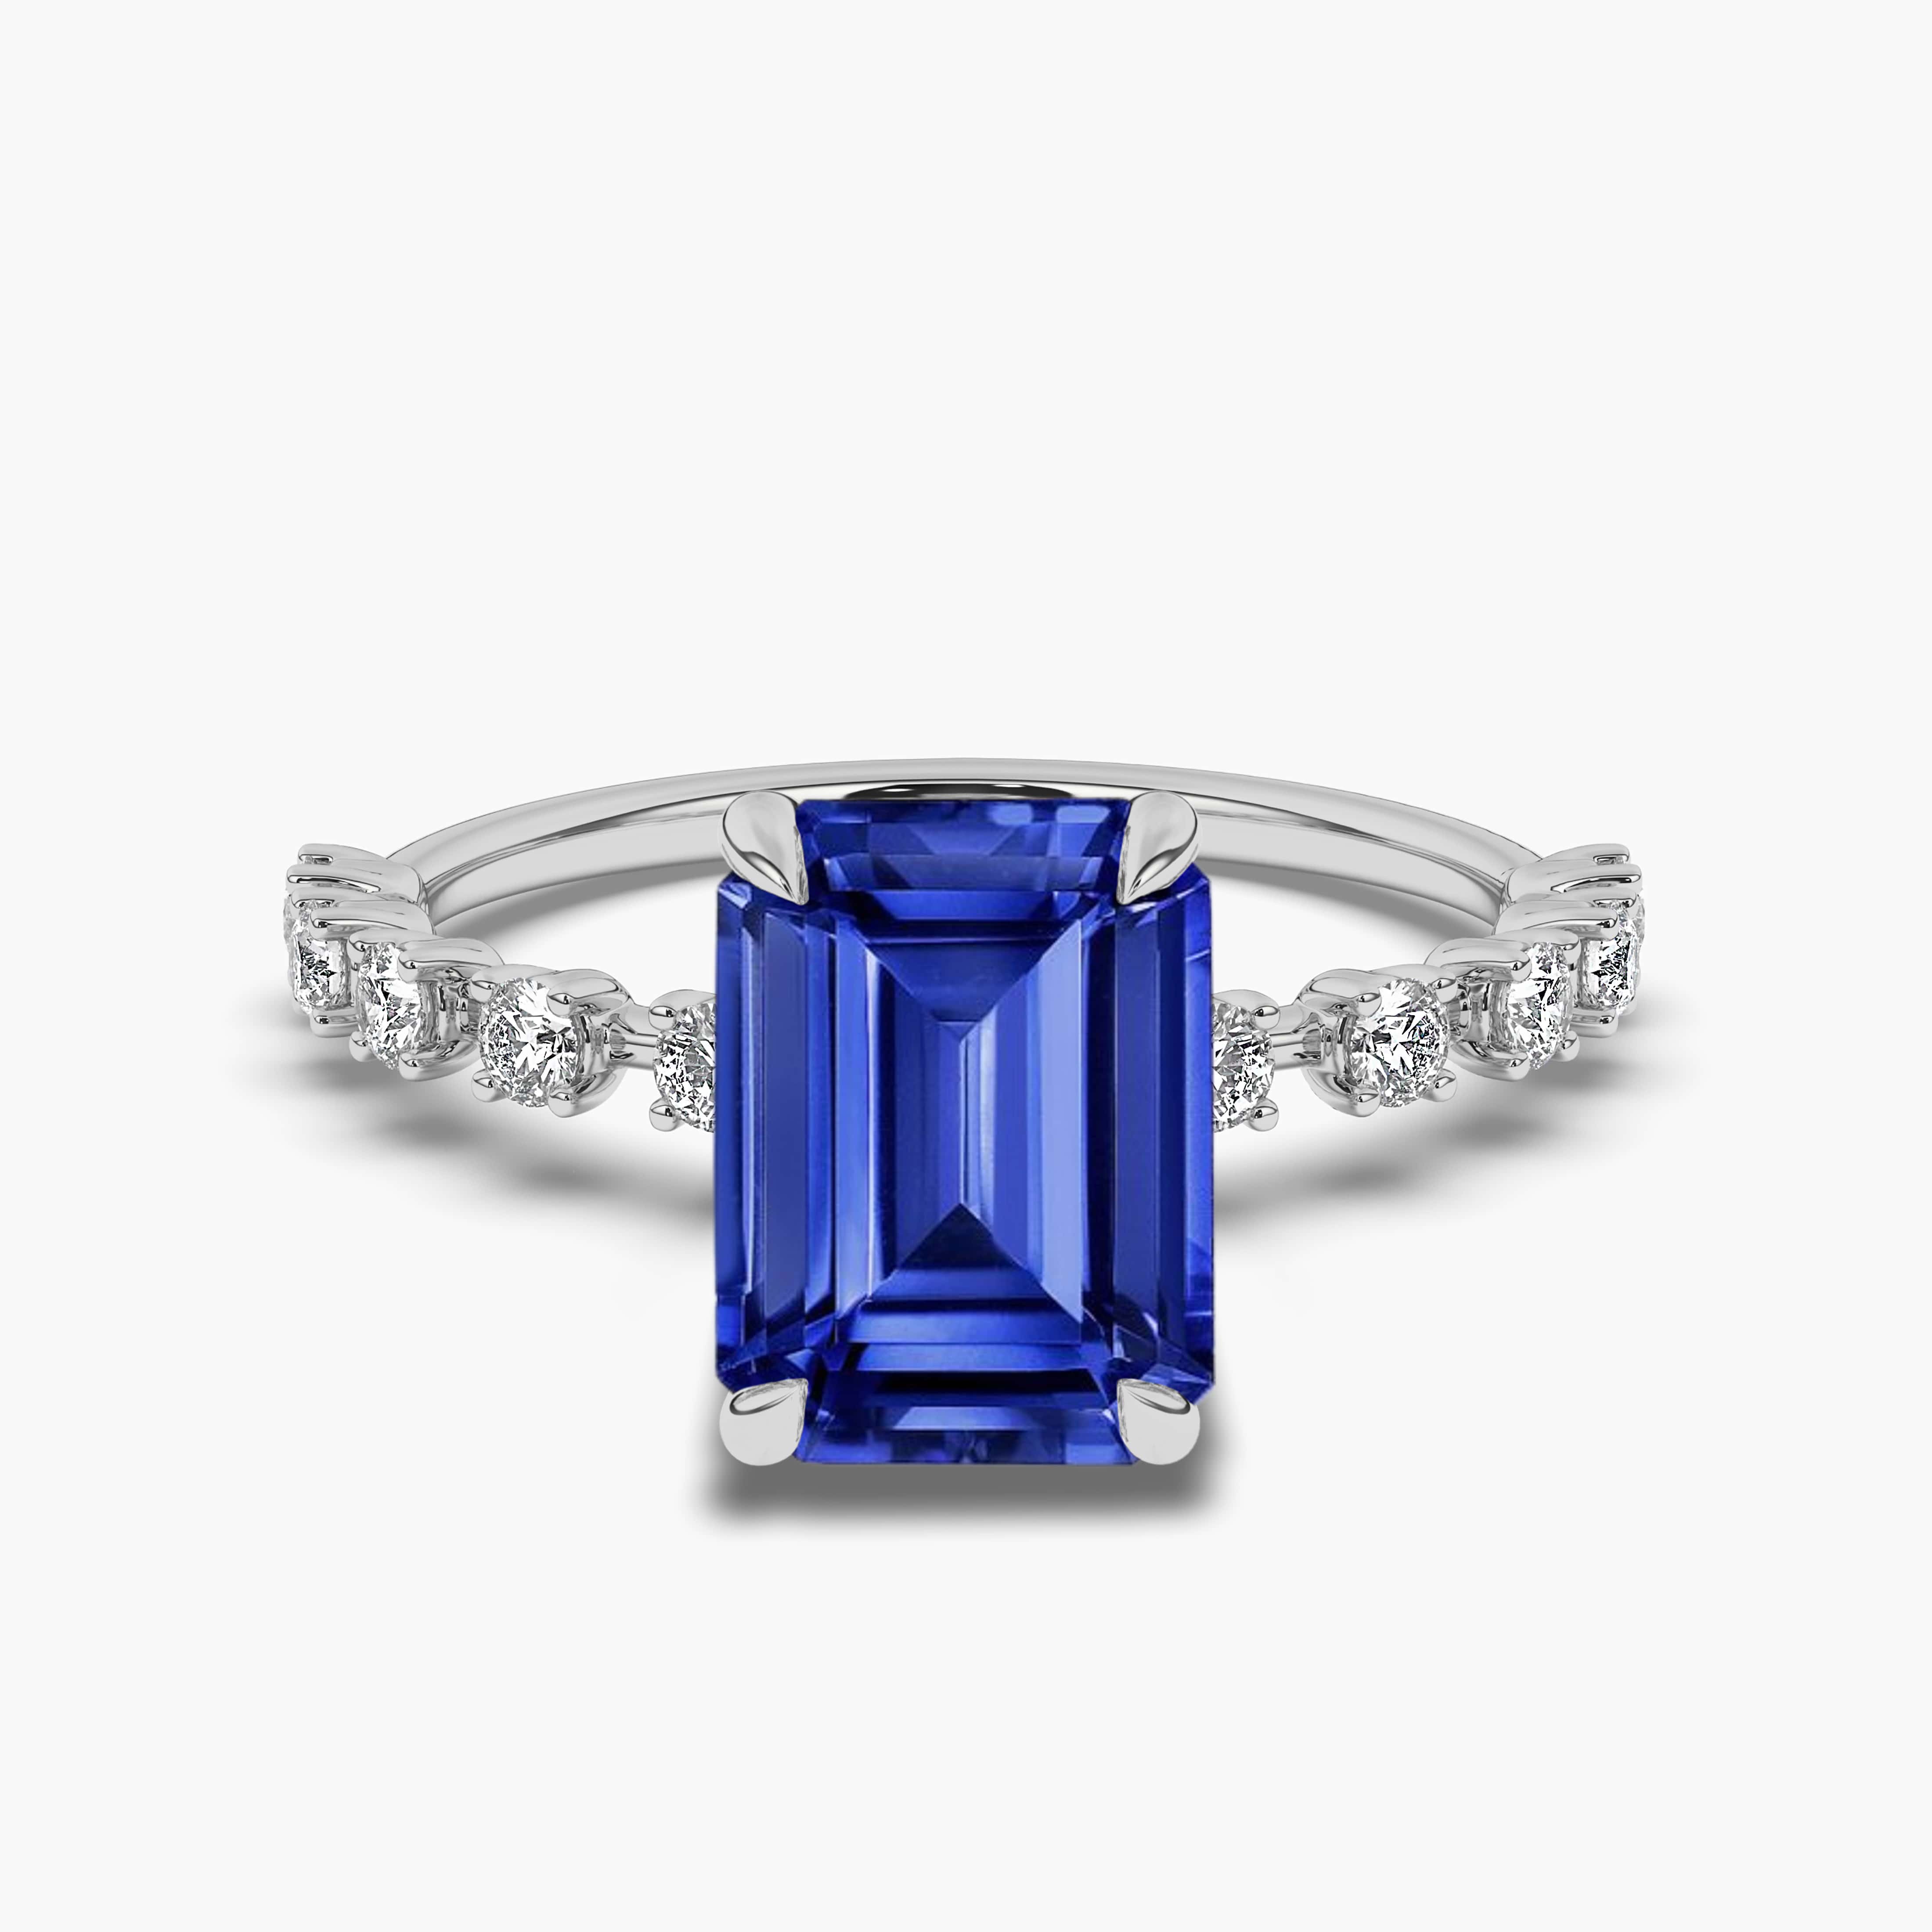 Emerald Cut Sapphire and Diamond Ring in white gold